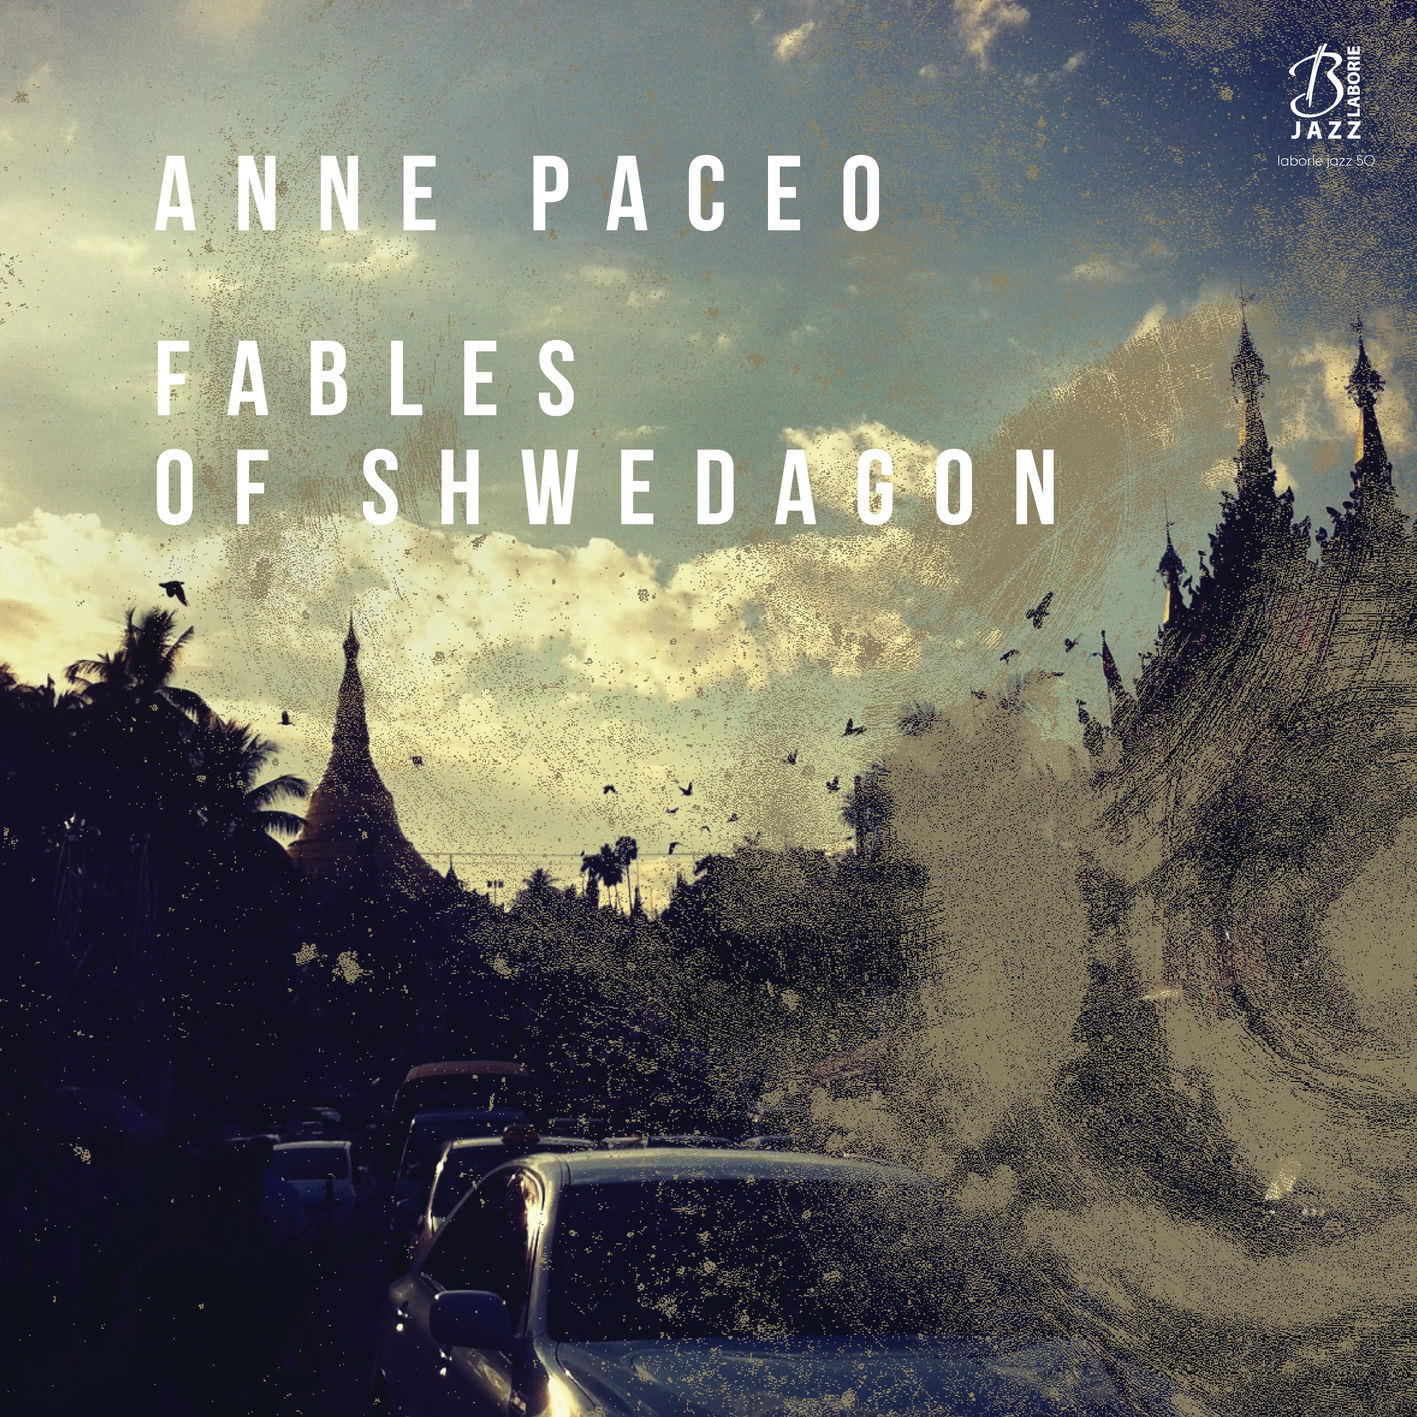 Anne Paceo – Fables of Shwedagon (2018) [FLAC 24bit/44,1kHz]